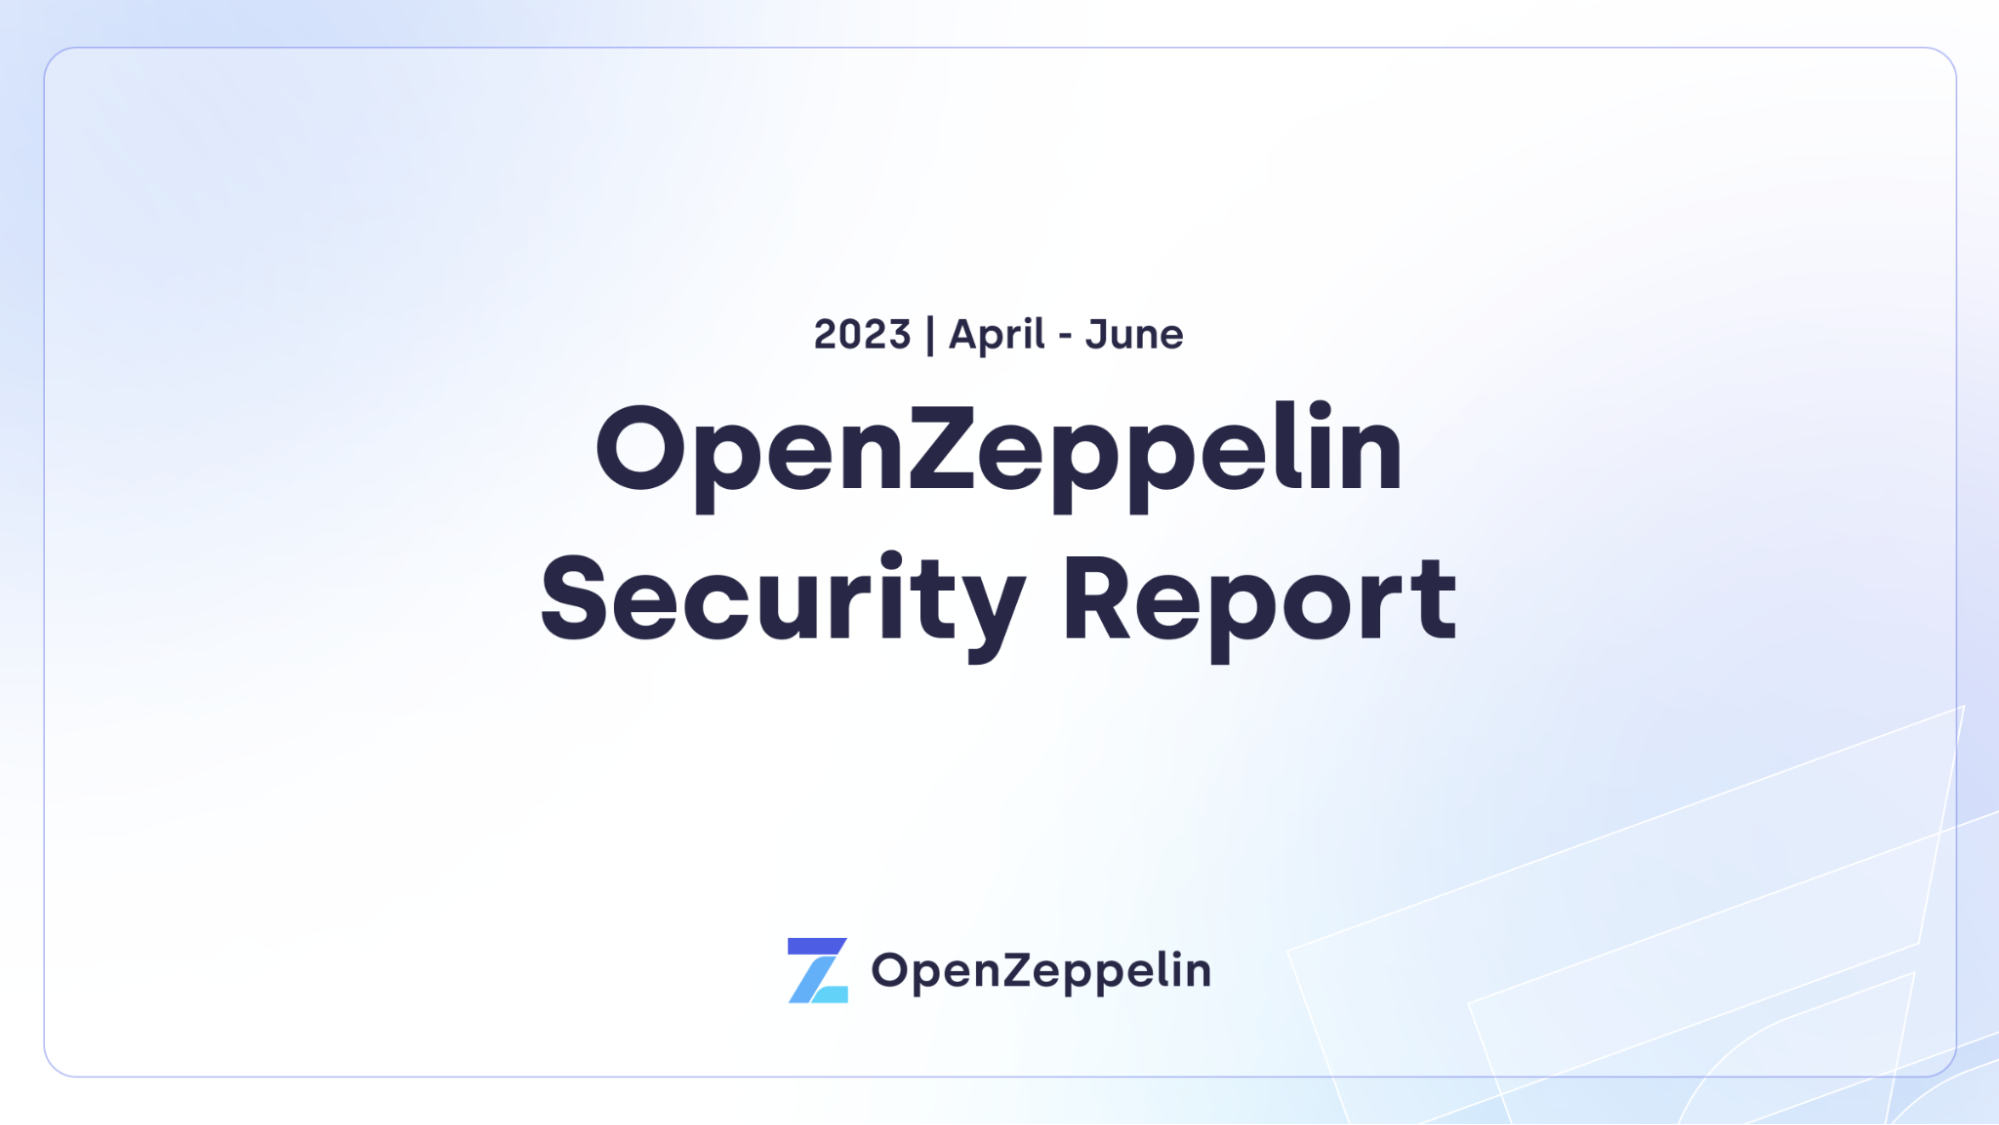 OpenZeppelin Security Report: Top Security Incidents and Insights from April - June 2023 Featured Image